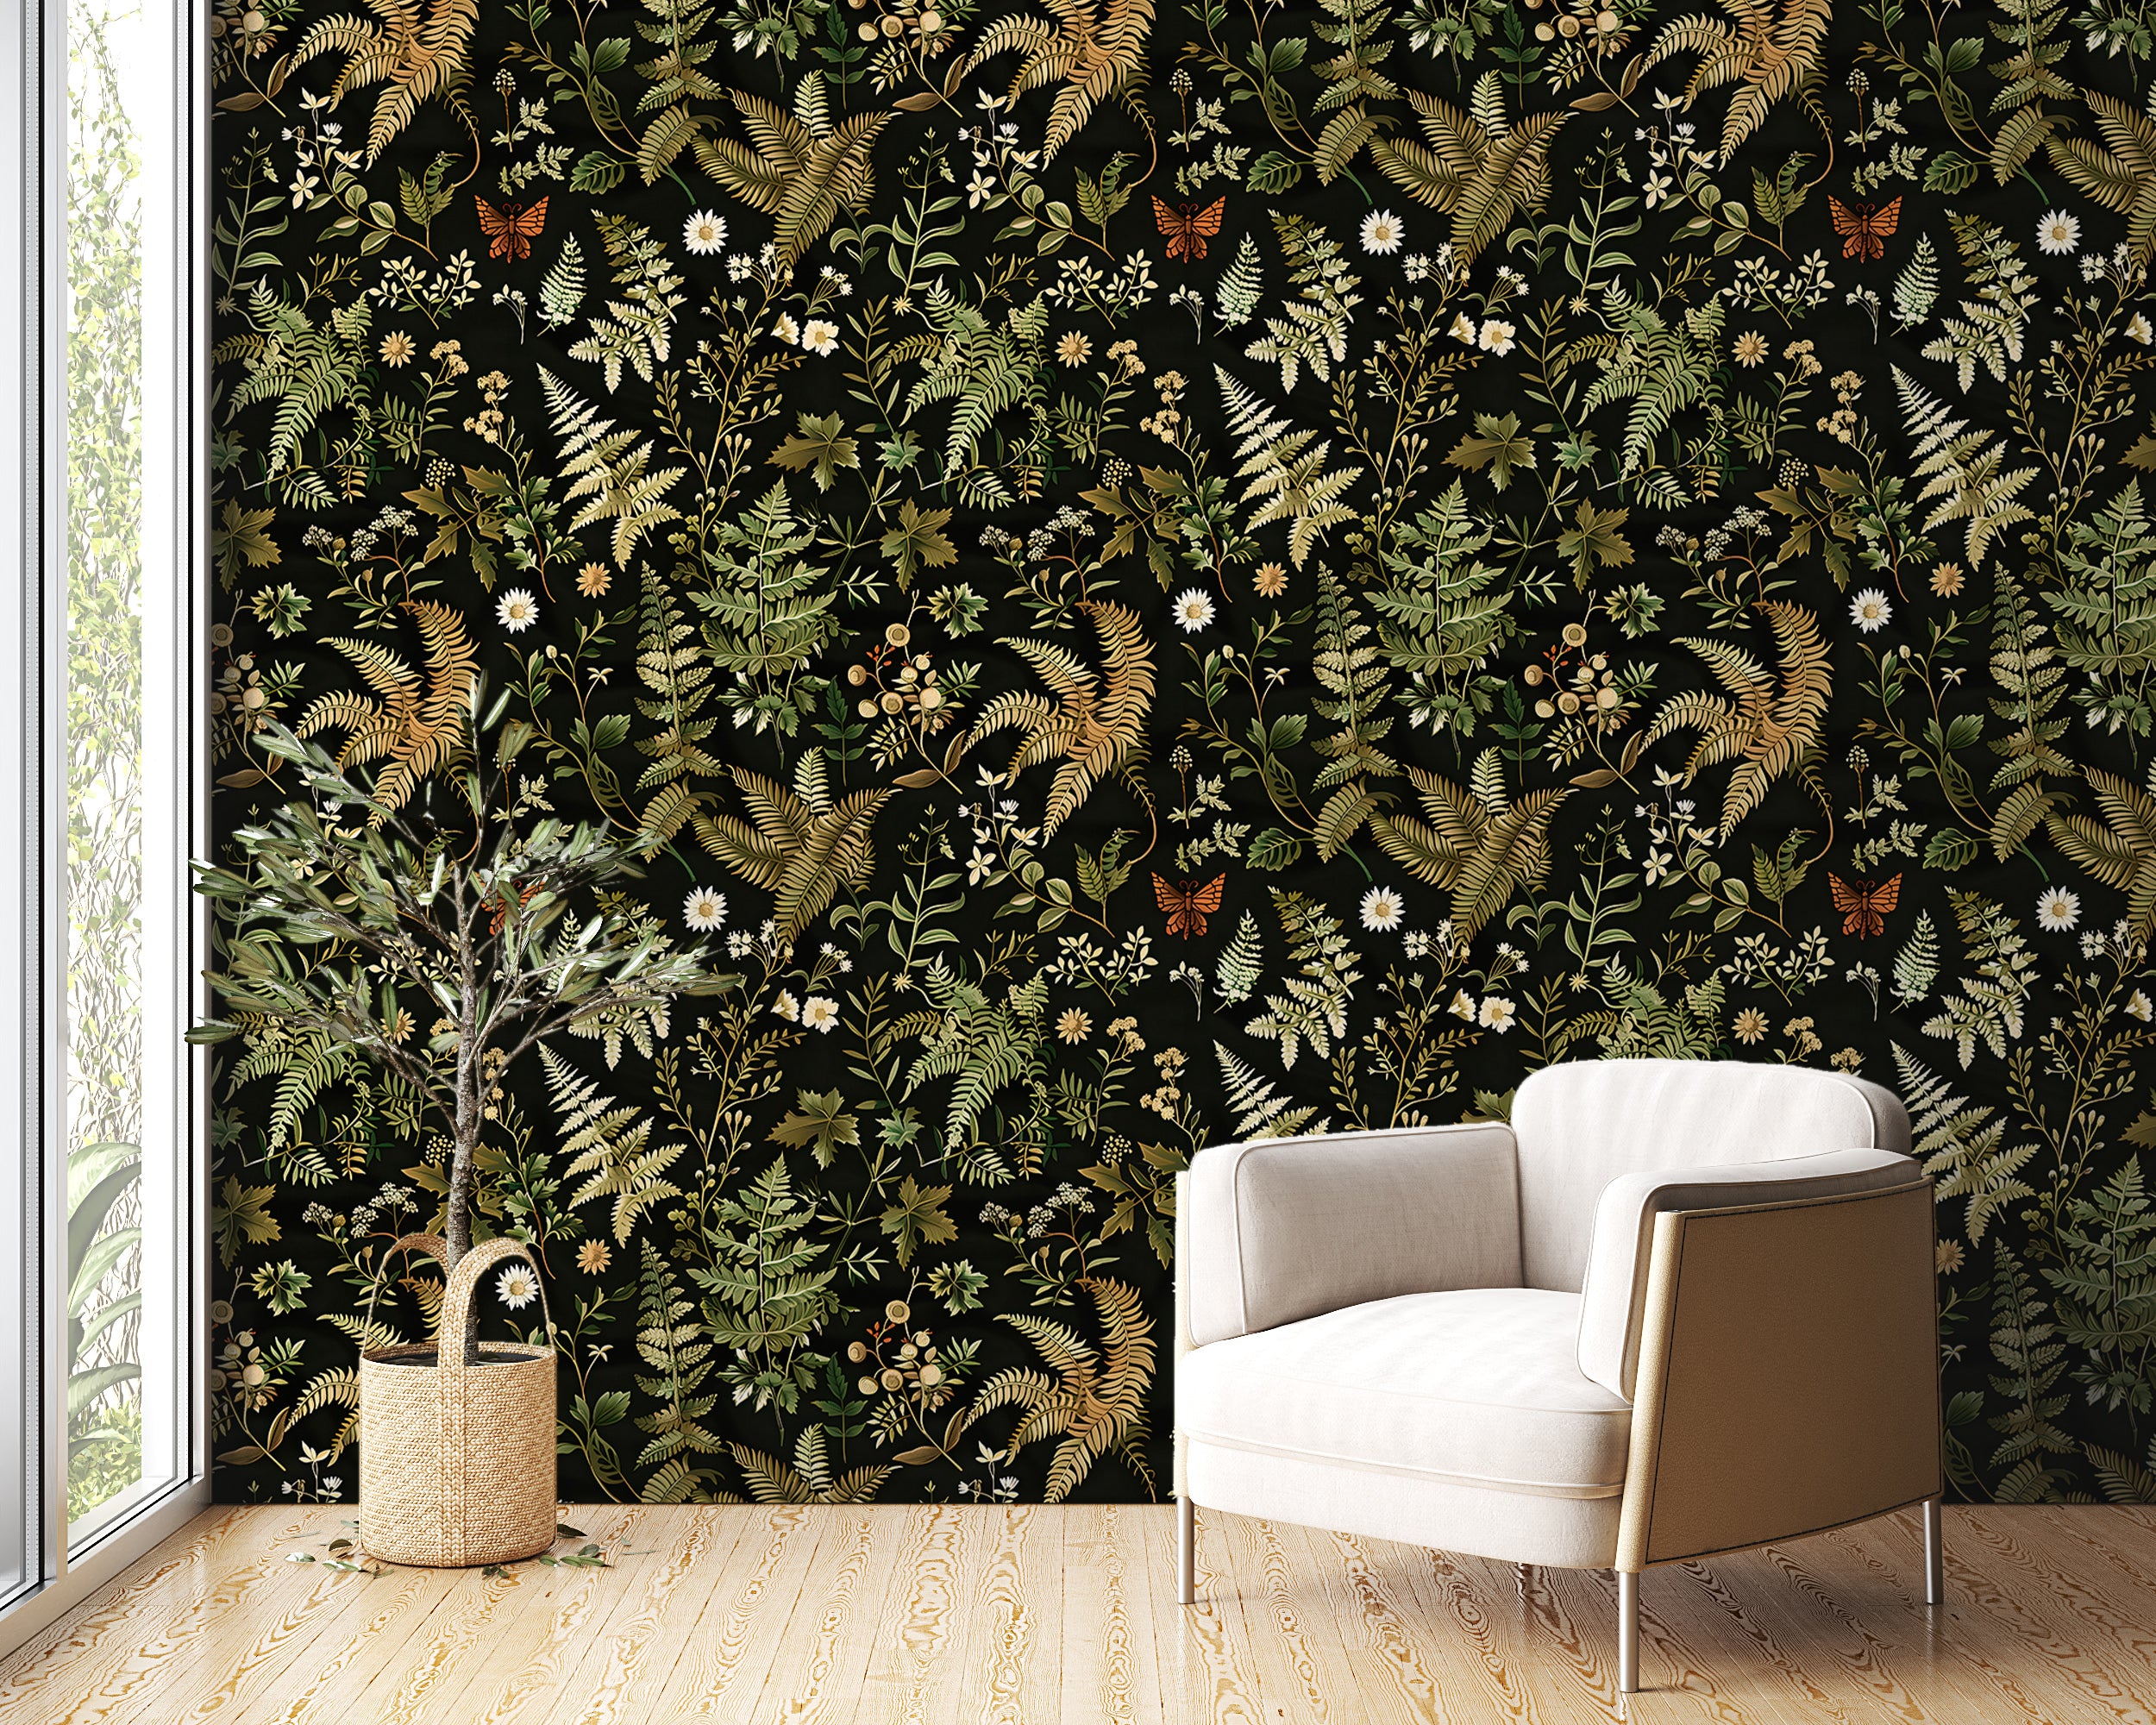 Dark Fern Botanical Pattern Wallpaper, Floral Leaves from Wild Forest Decal, Peel and Stick Removable Greenery Decor, PVC-free Black and Green